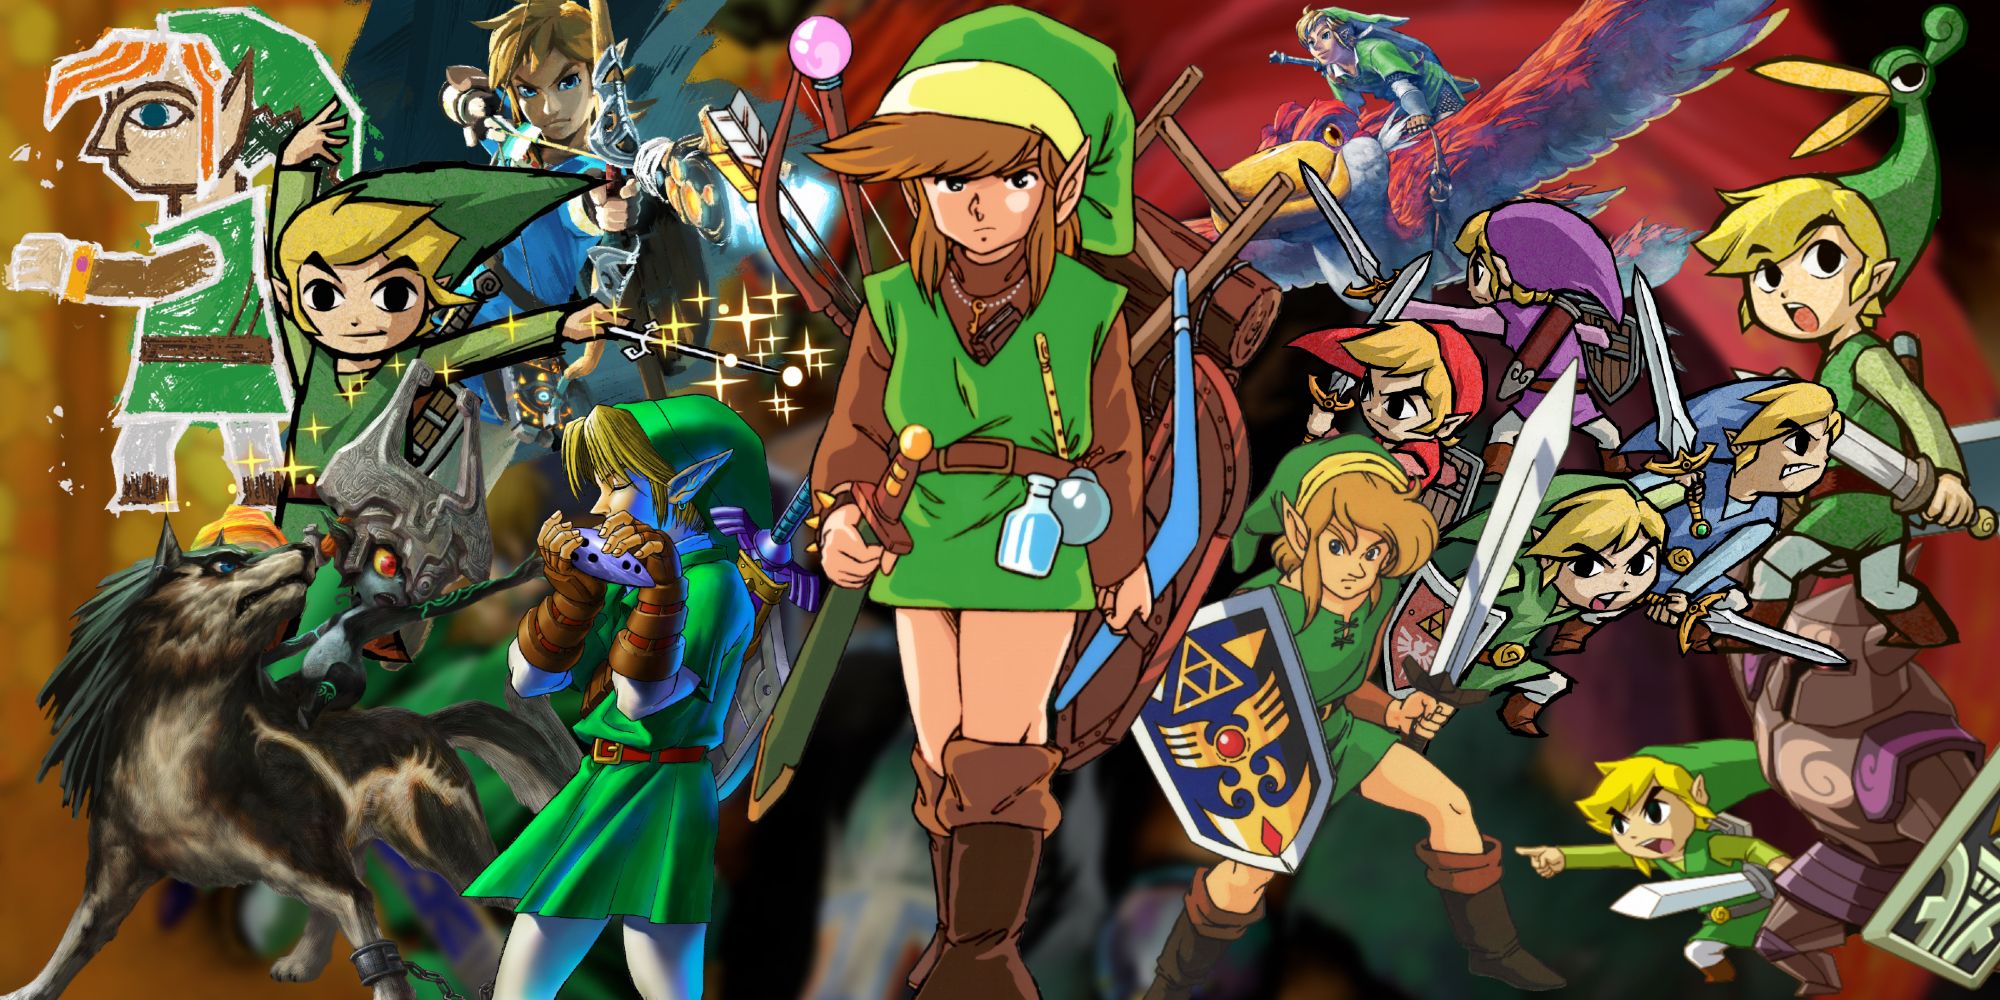 A collage of every version of Link seen in the Legend of Zelda Series